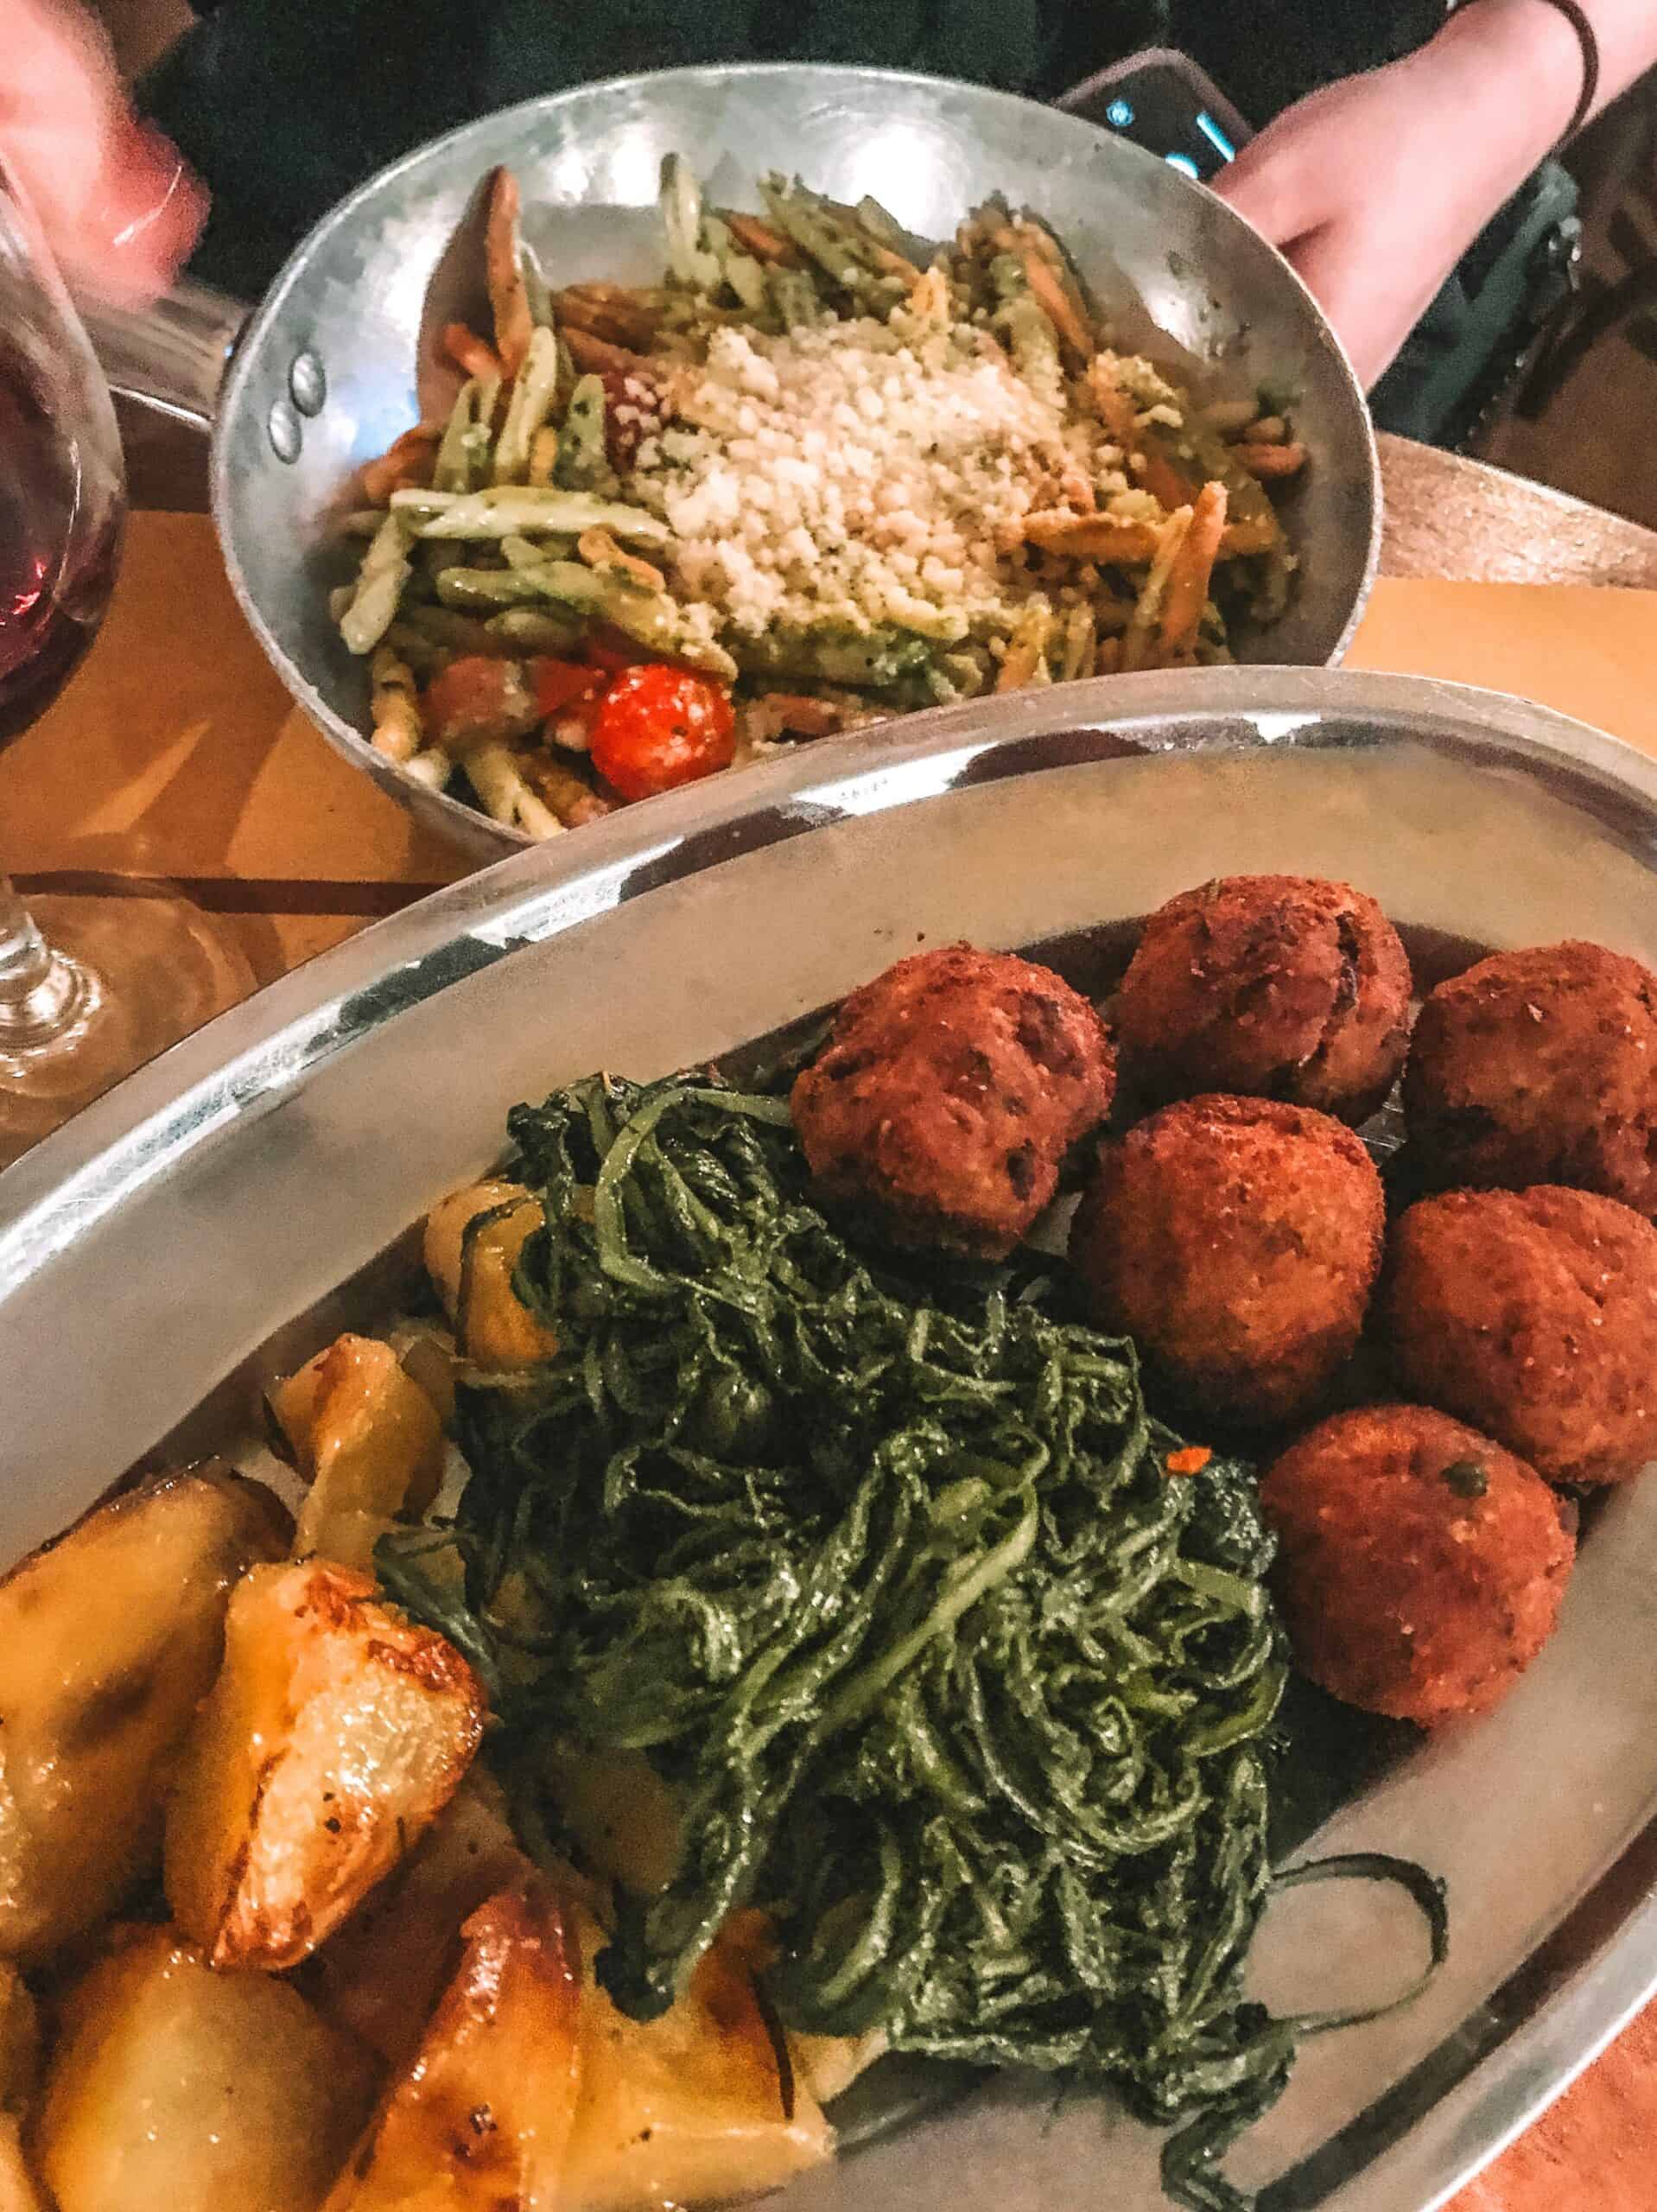 Homemade pasta and pesto and eggplant meatballs with roasted potatoes from Tonnarello. 